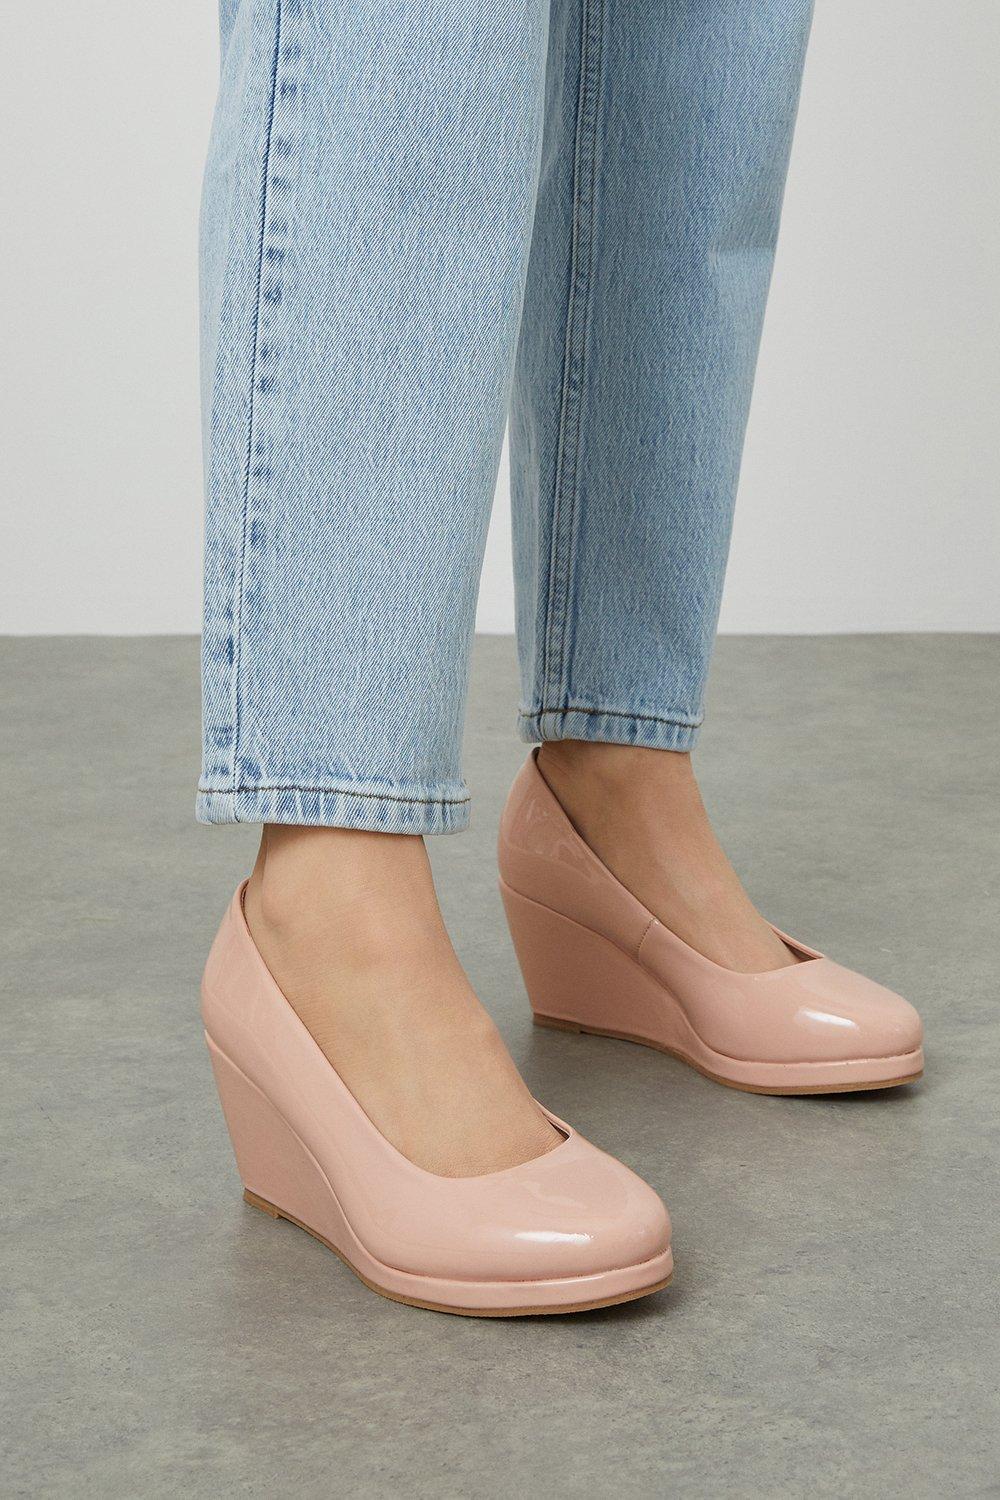 Women's Good For The Sole: Wide Fit Harley Wedge Court Shoes - blush - 3